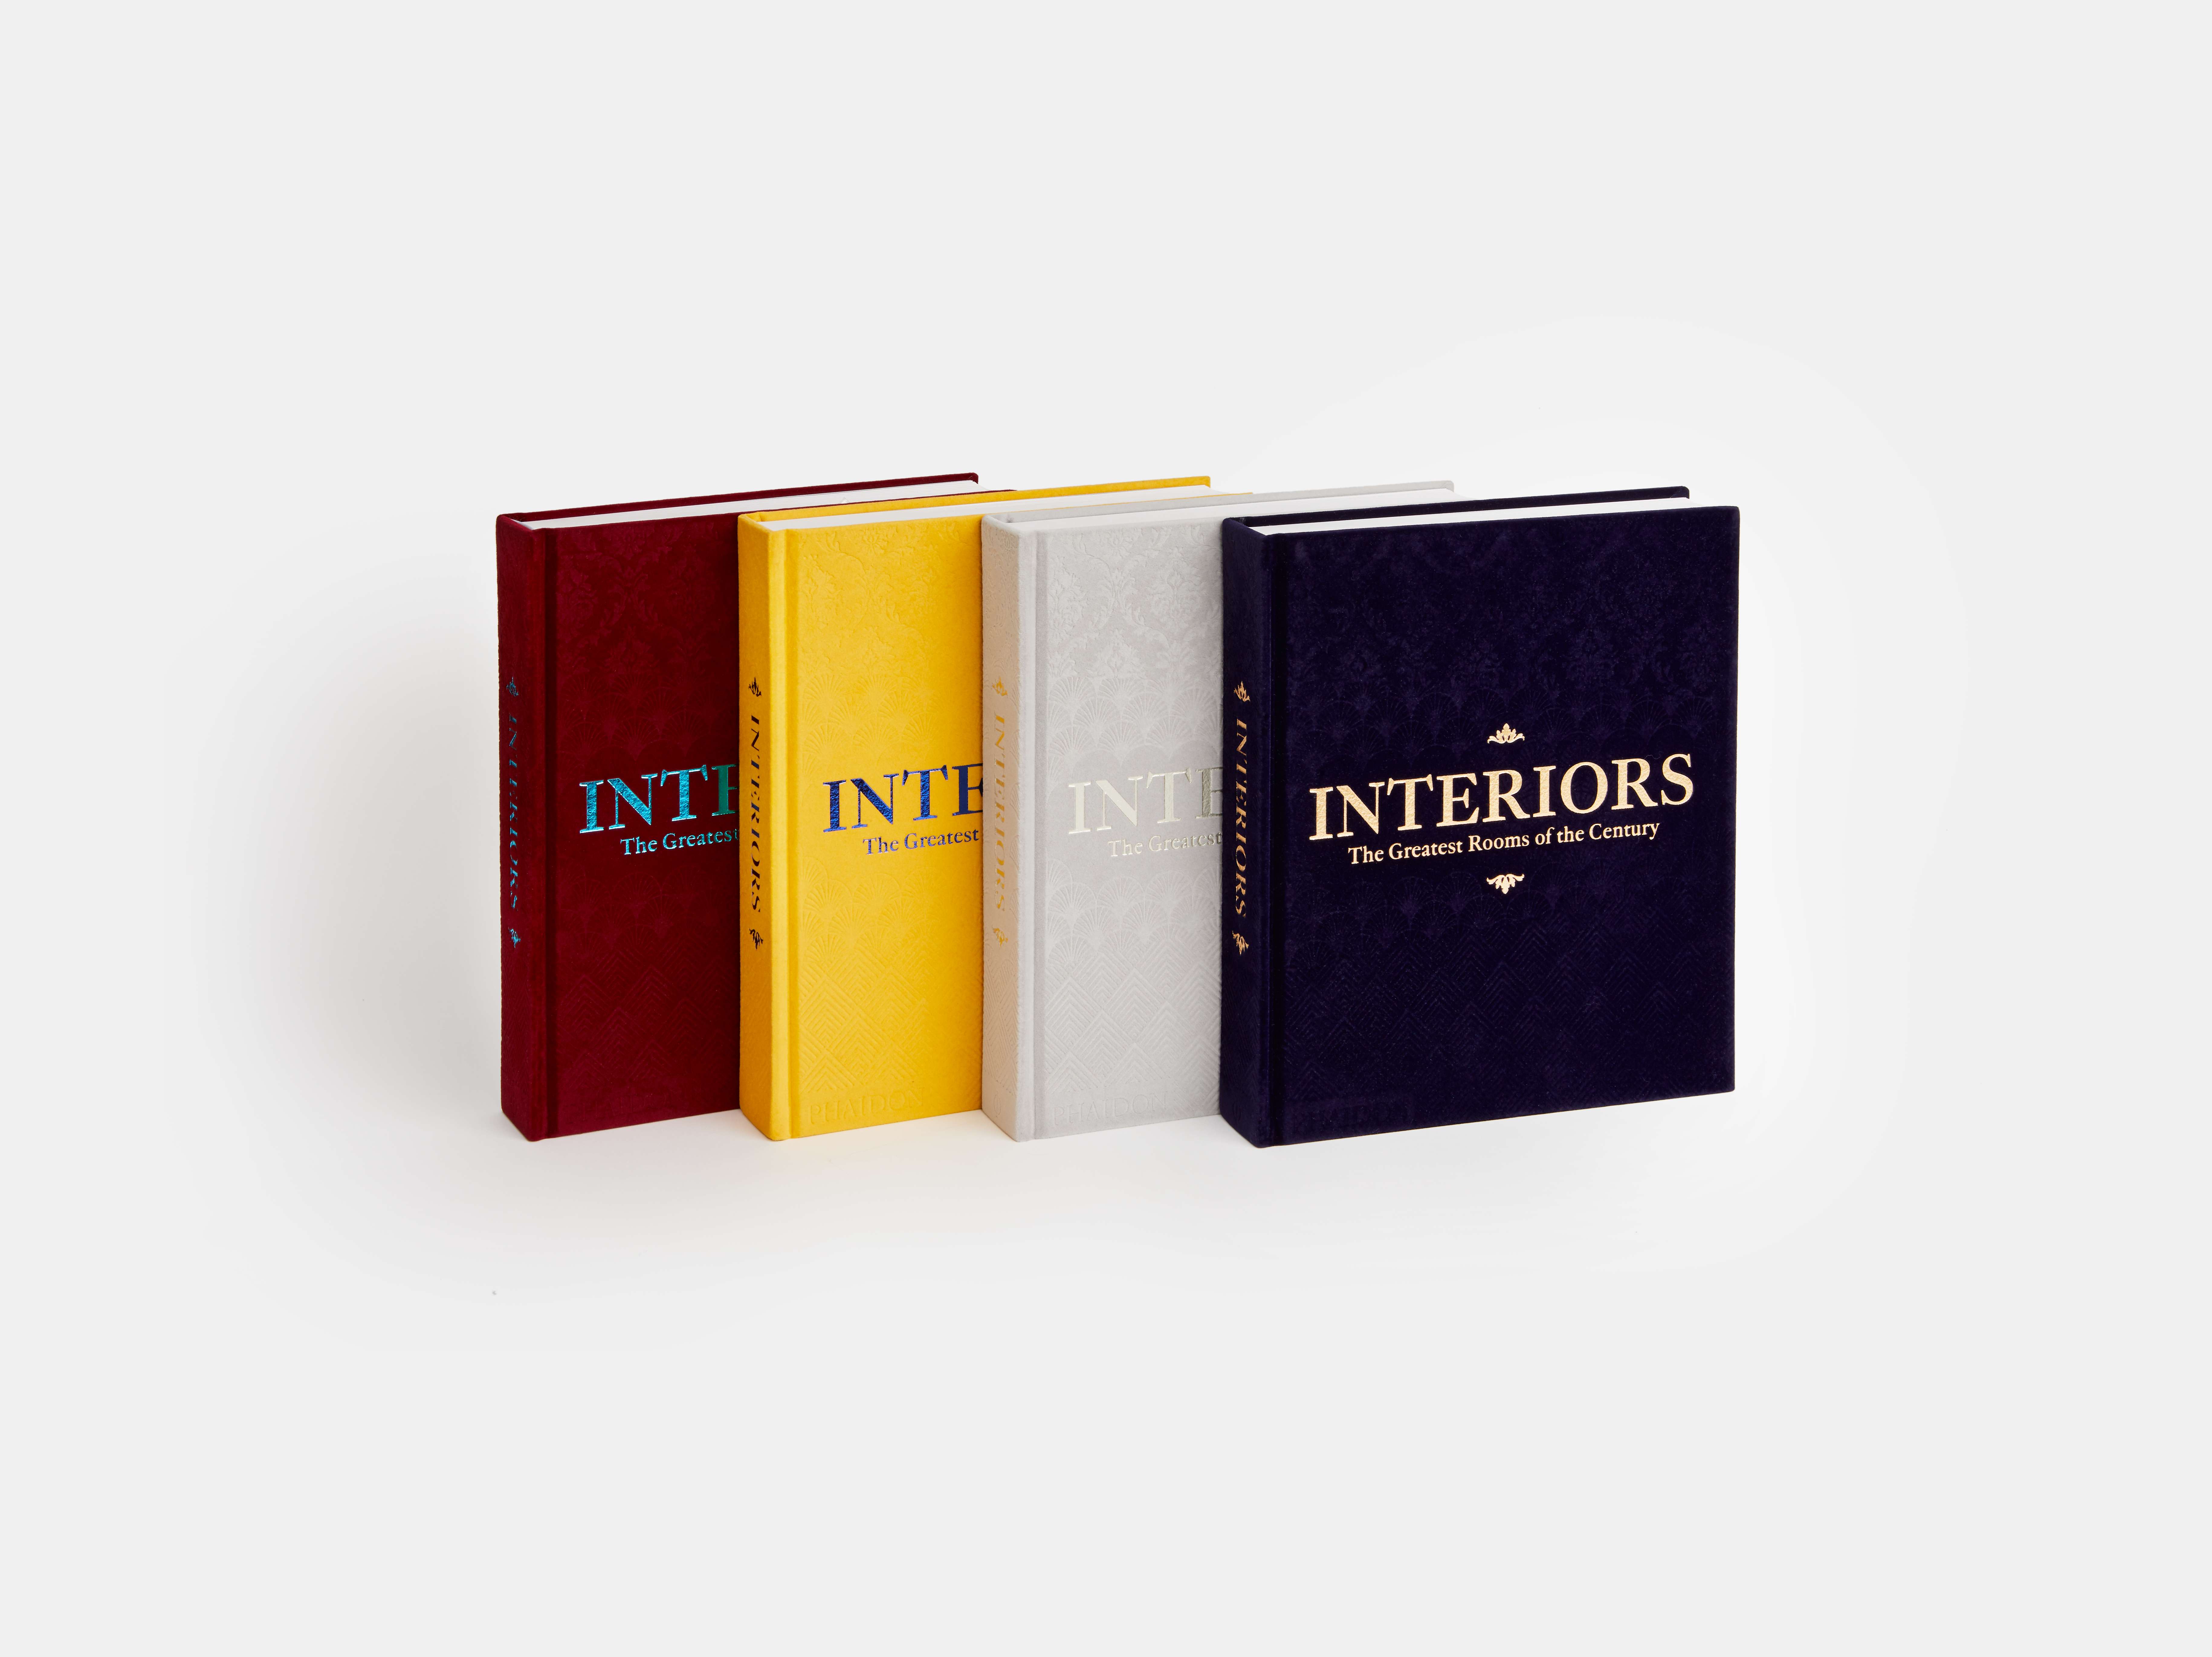 Phaidon's Interiors: The Greatest Rooms of the Century is available on Artspace for $79